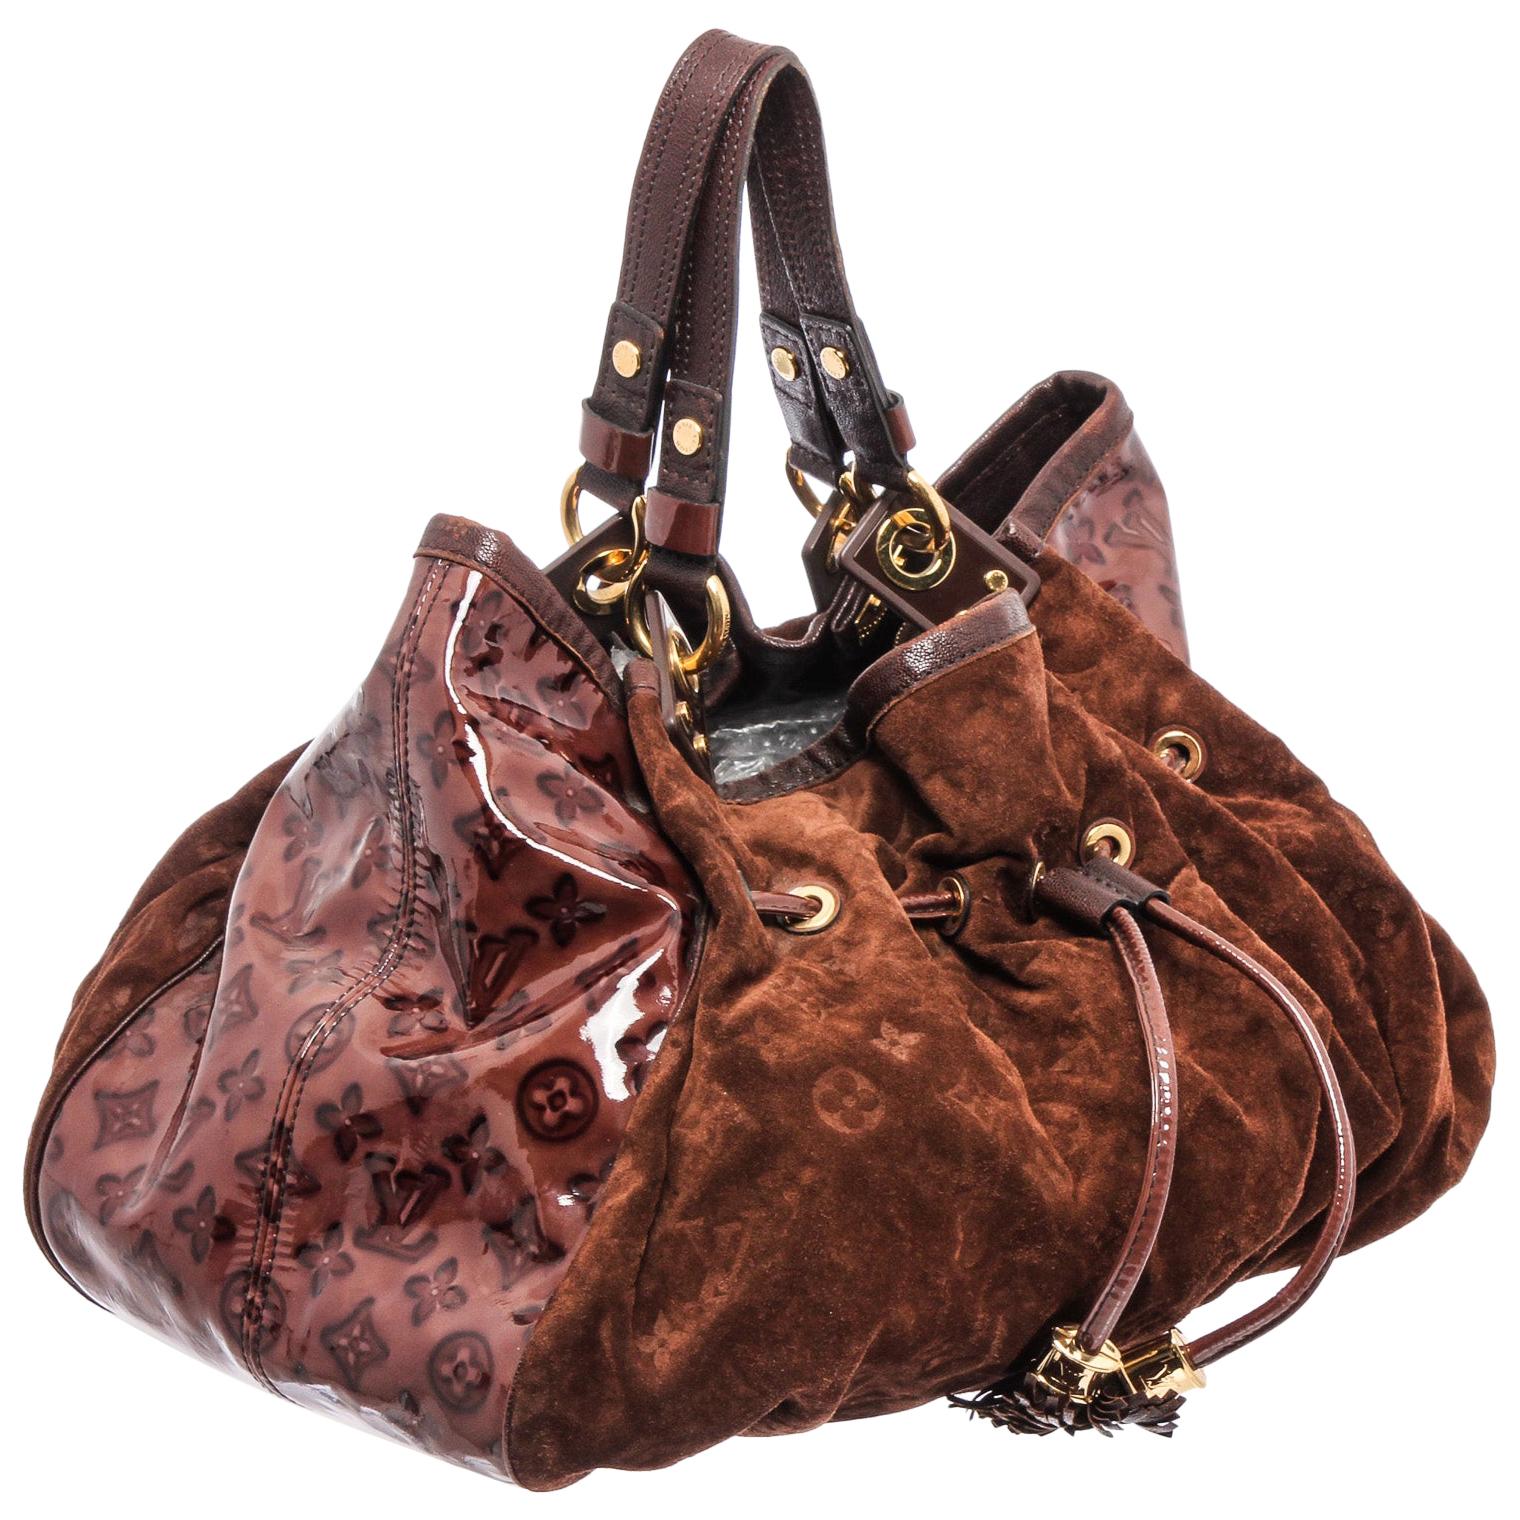 Louis Vuitton Limited Edition Monogram Irene Bag - Brown Totes